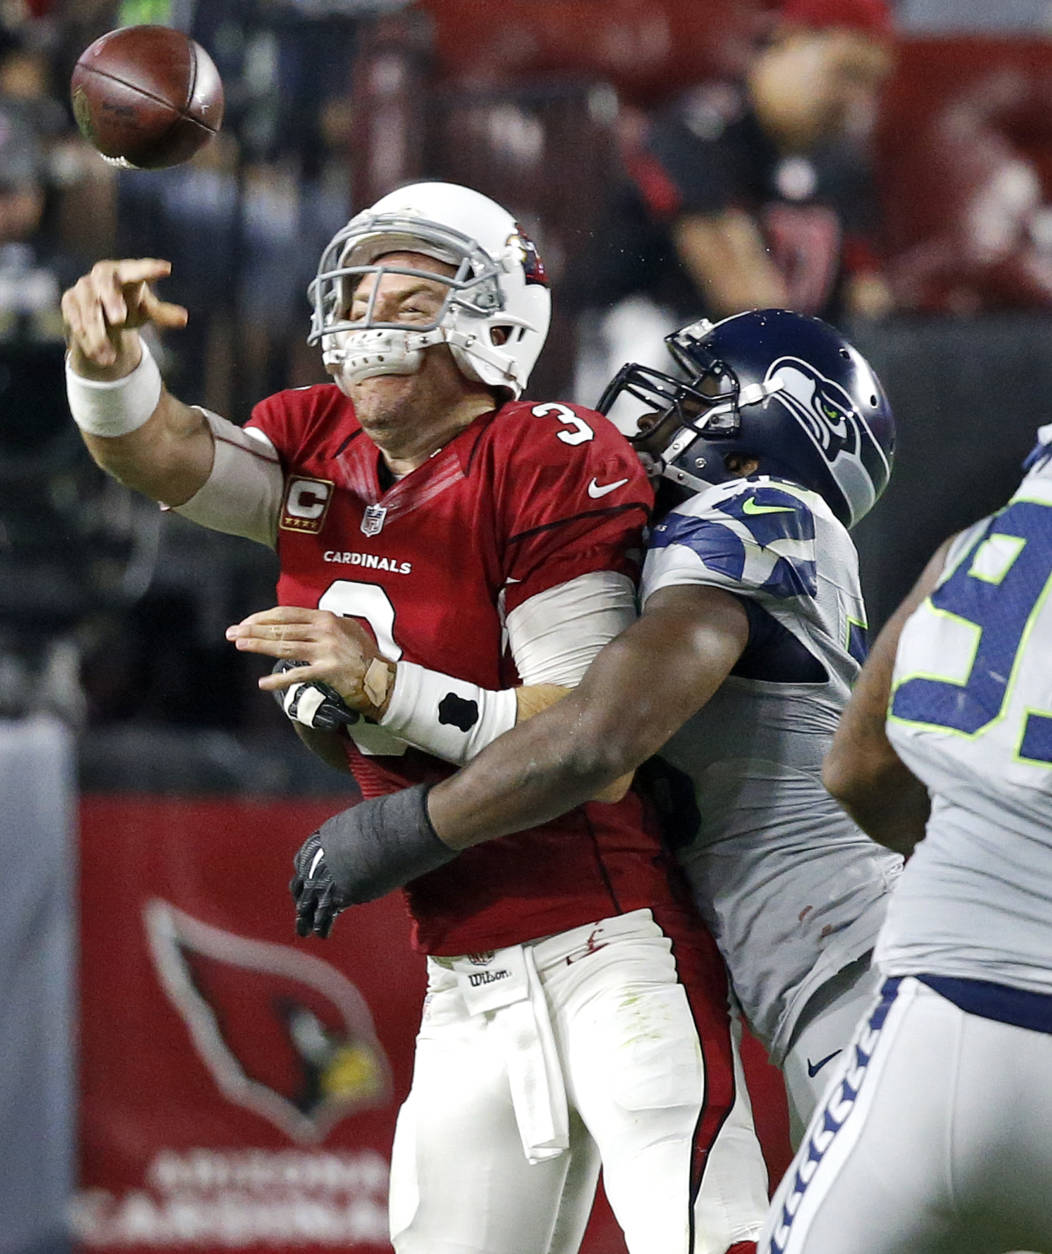 Arizona Cardinals quarterback Carson Palmer (3) his hit as he throws by Seattle Seahawks defensive tackle Ahtyba Rubin during the second half of a football game, Sunday, Oct. 23, 2016, in Glendale, Ariz. (AP Photo/Ross D. Franklin)